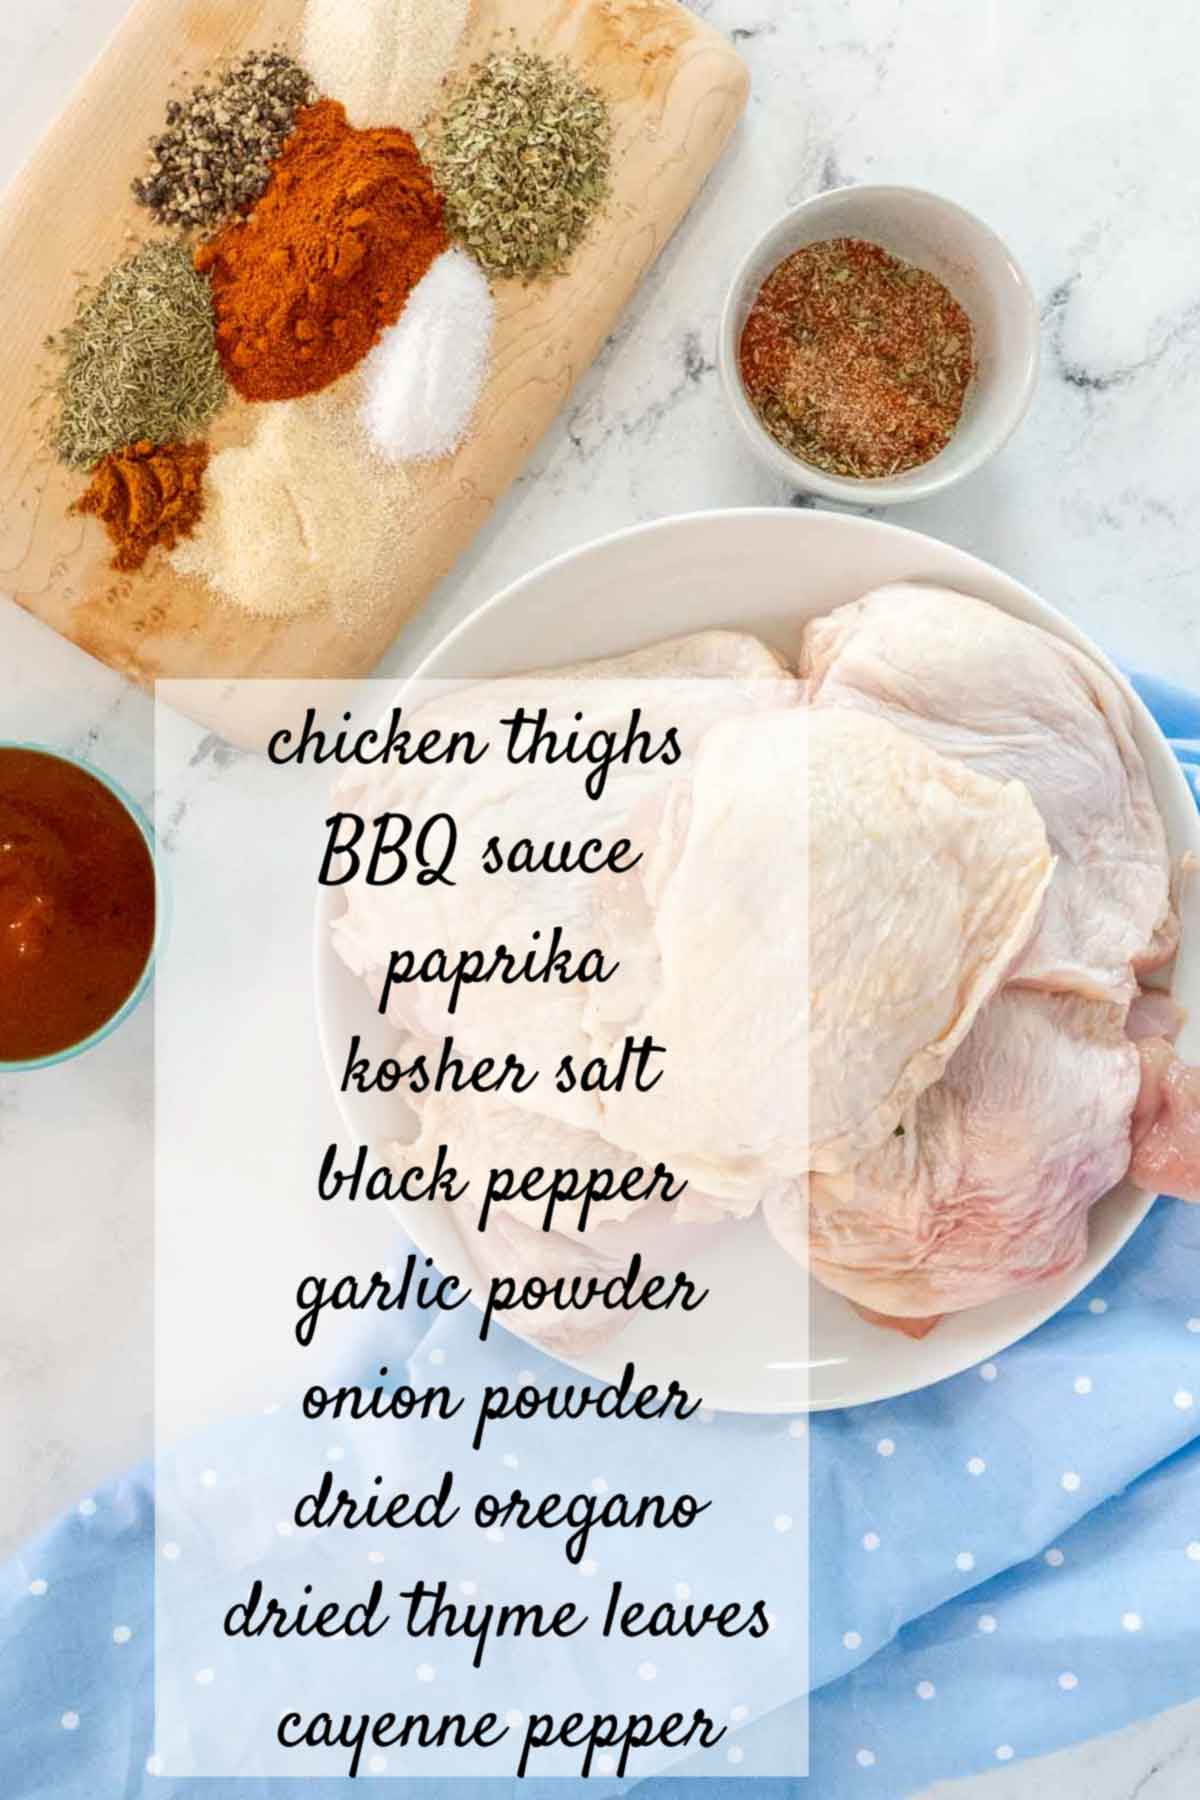 BBQ chicken ingredients laid out on counter